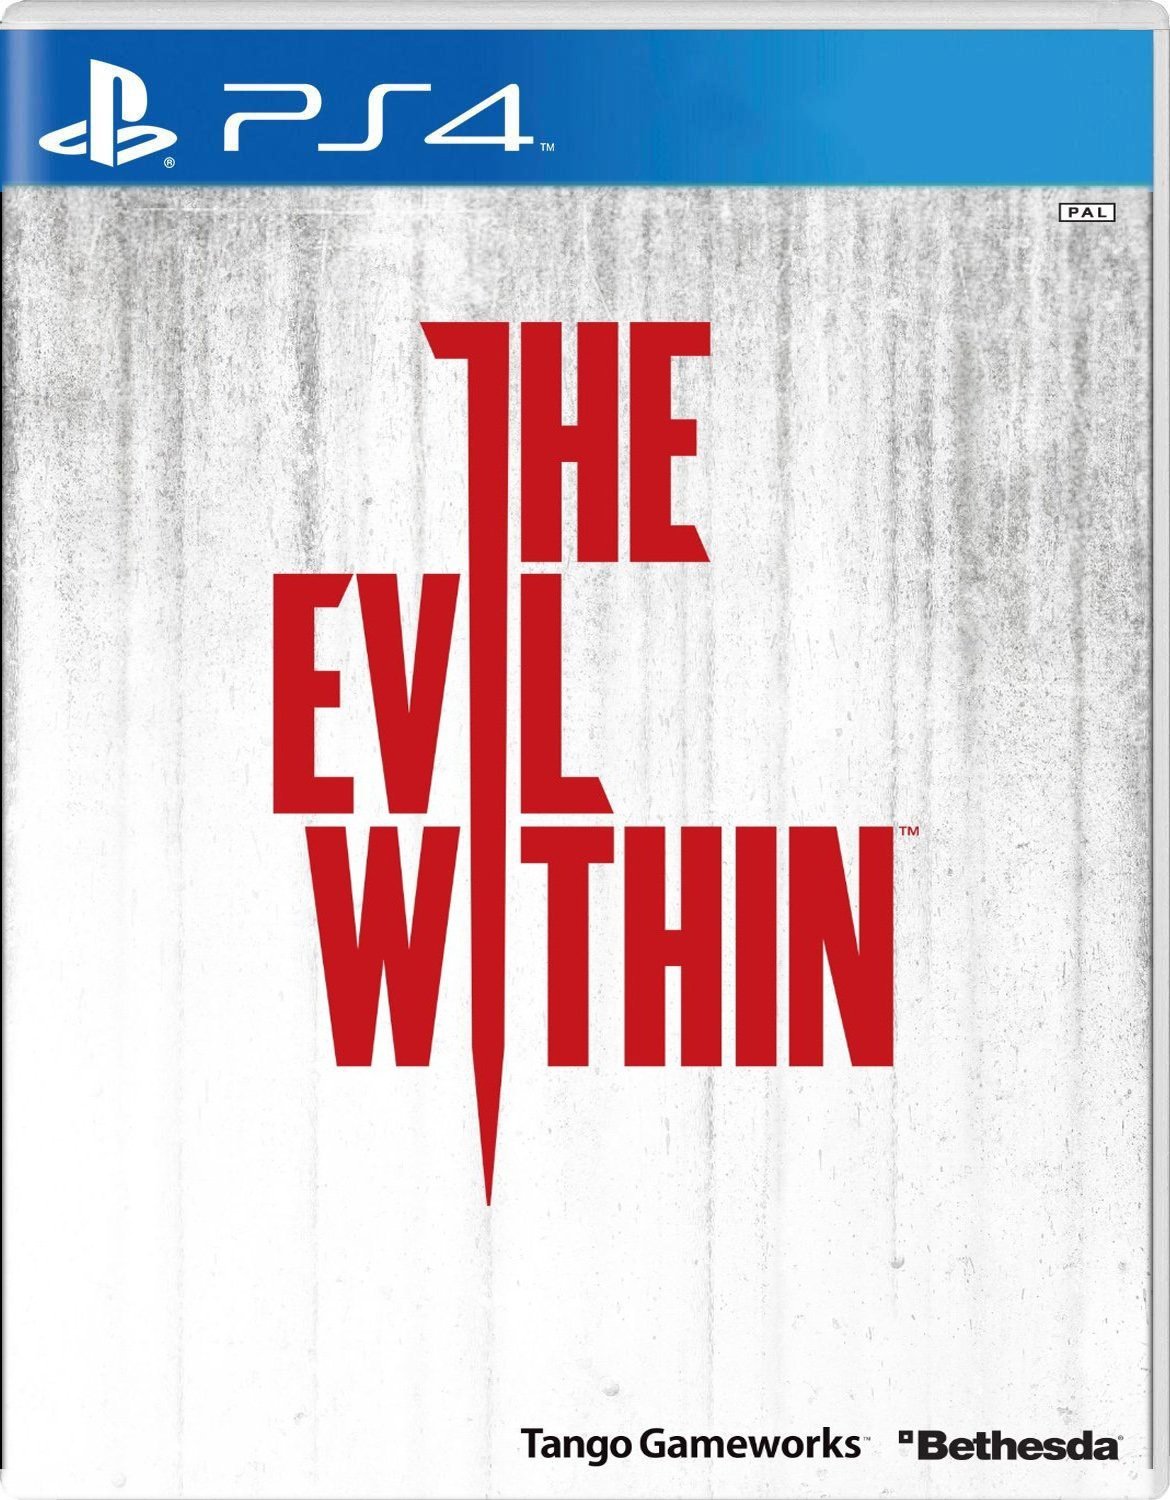 The Evil Within [PS4, русские субтитры]